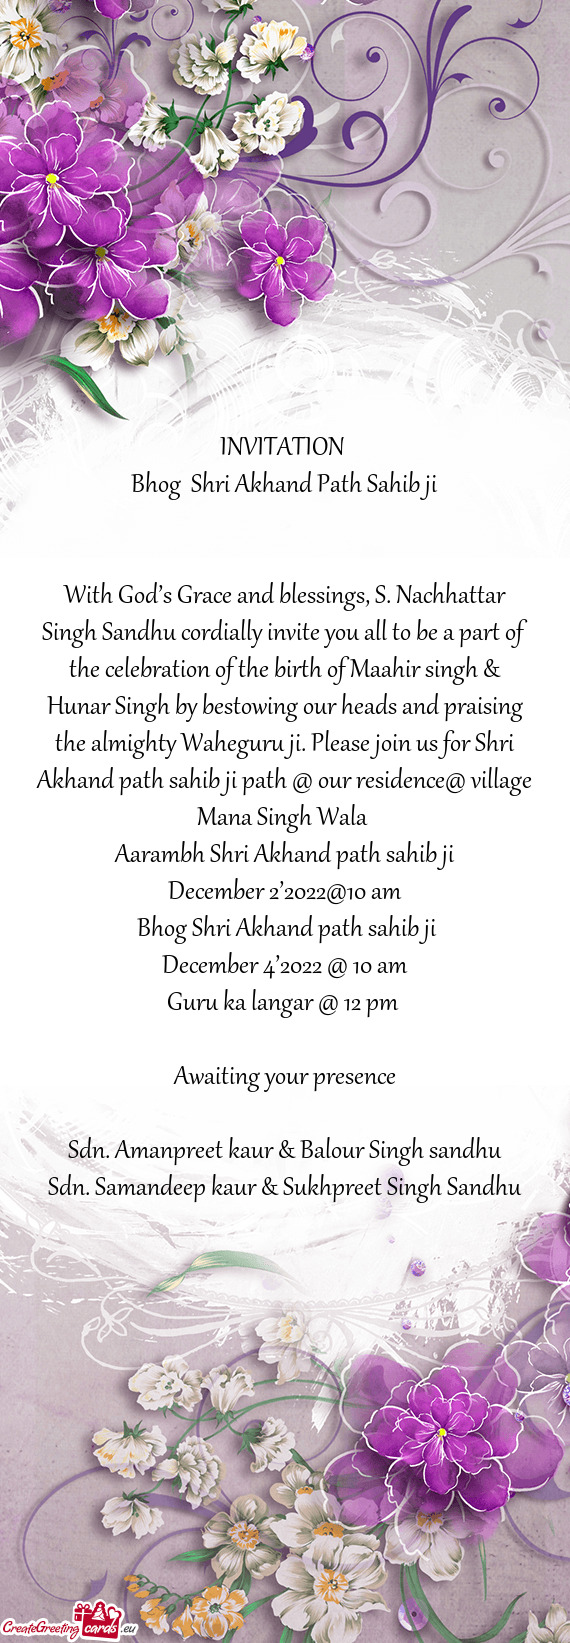 With God’s Grace and blessings, S. Nachhattar Singh Sandhu cordially invite you all to be a part o